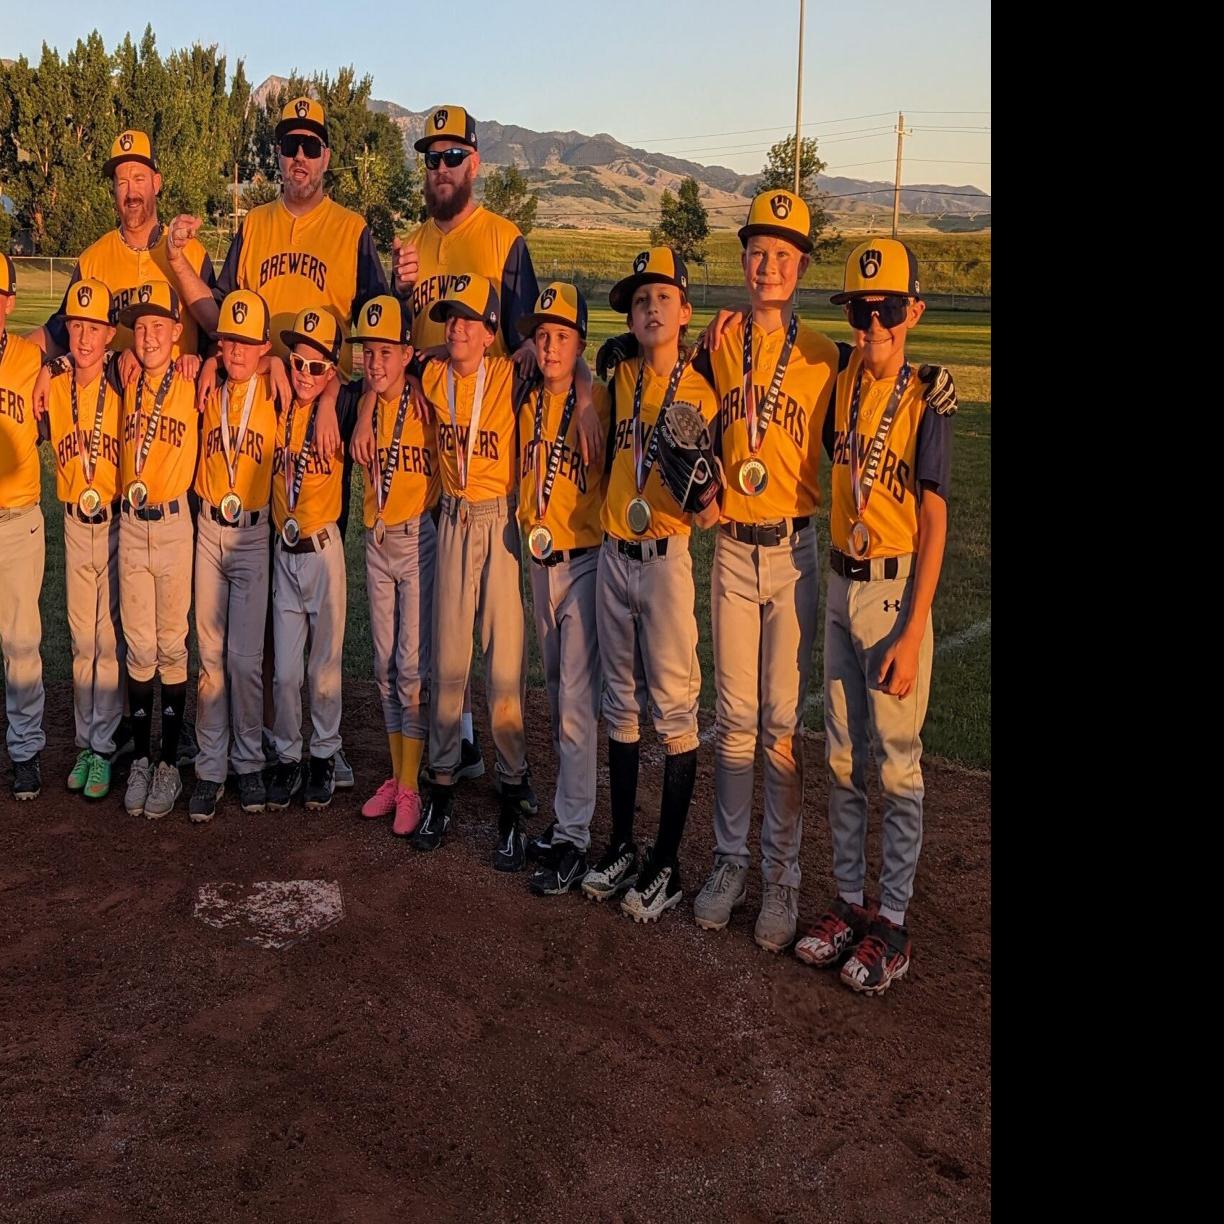 Youth baseball: Brewers rally past Rockies to win local tourney, Local  Sports